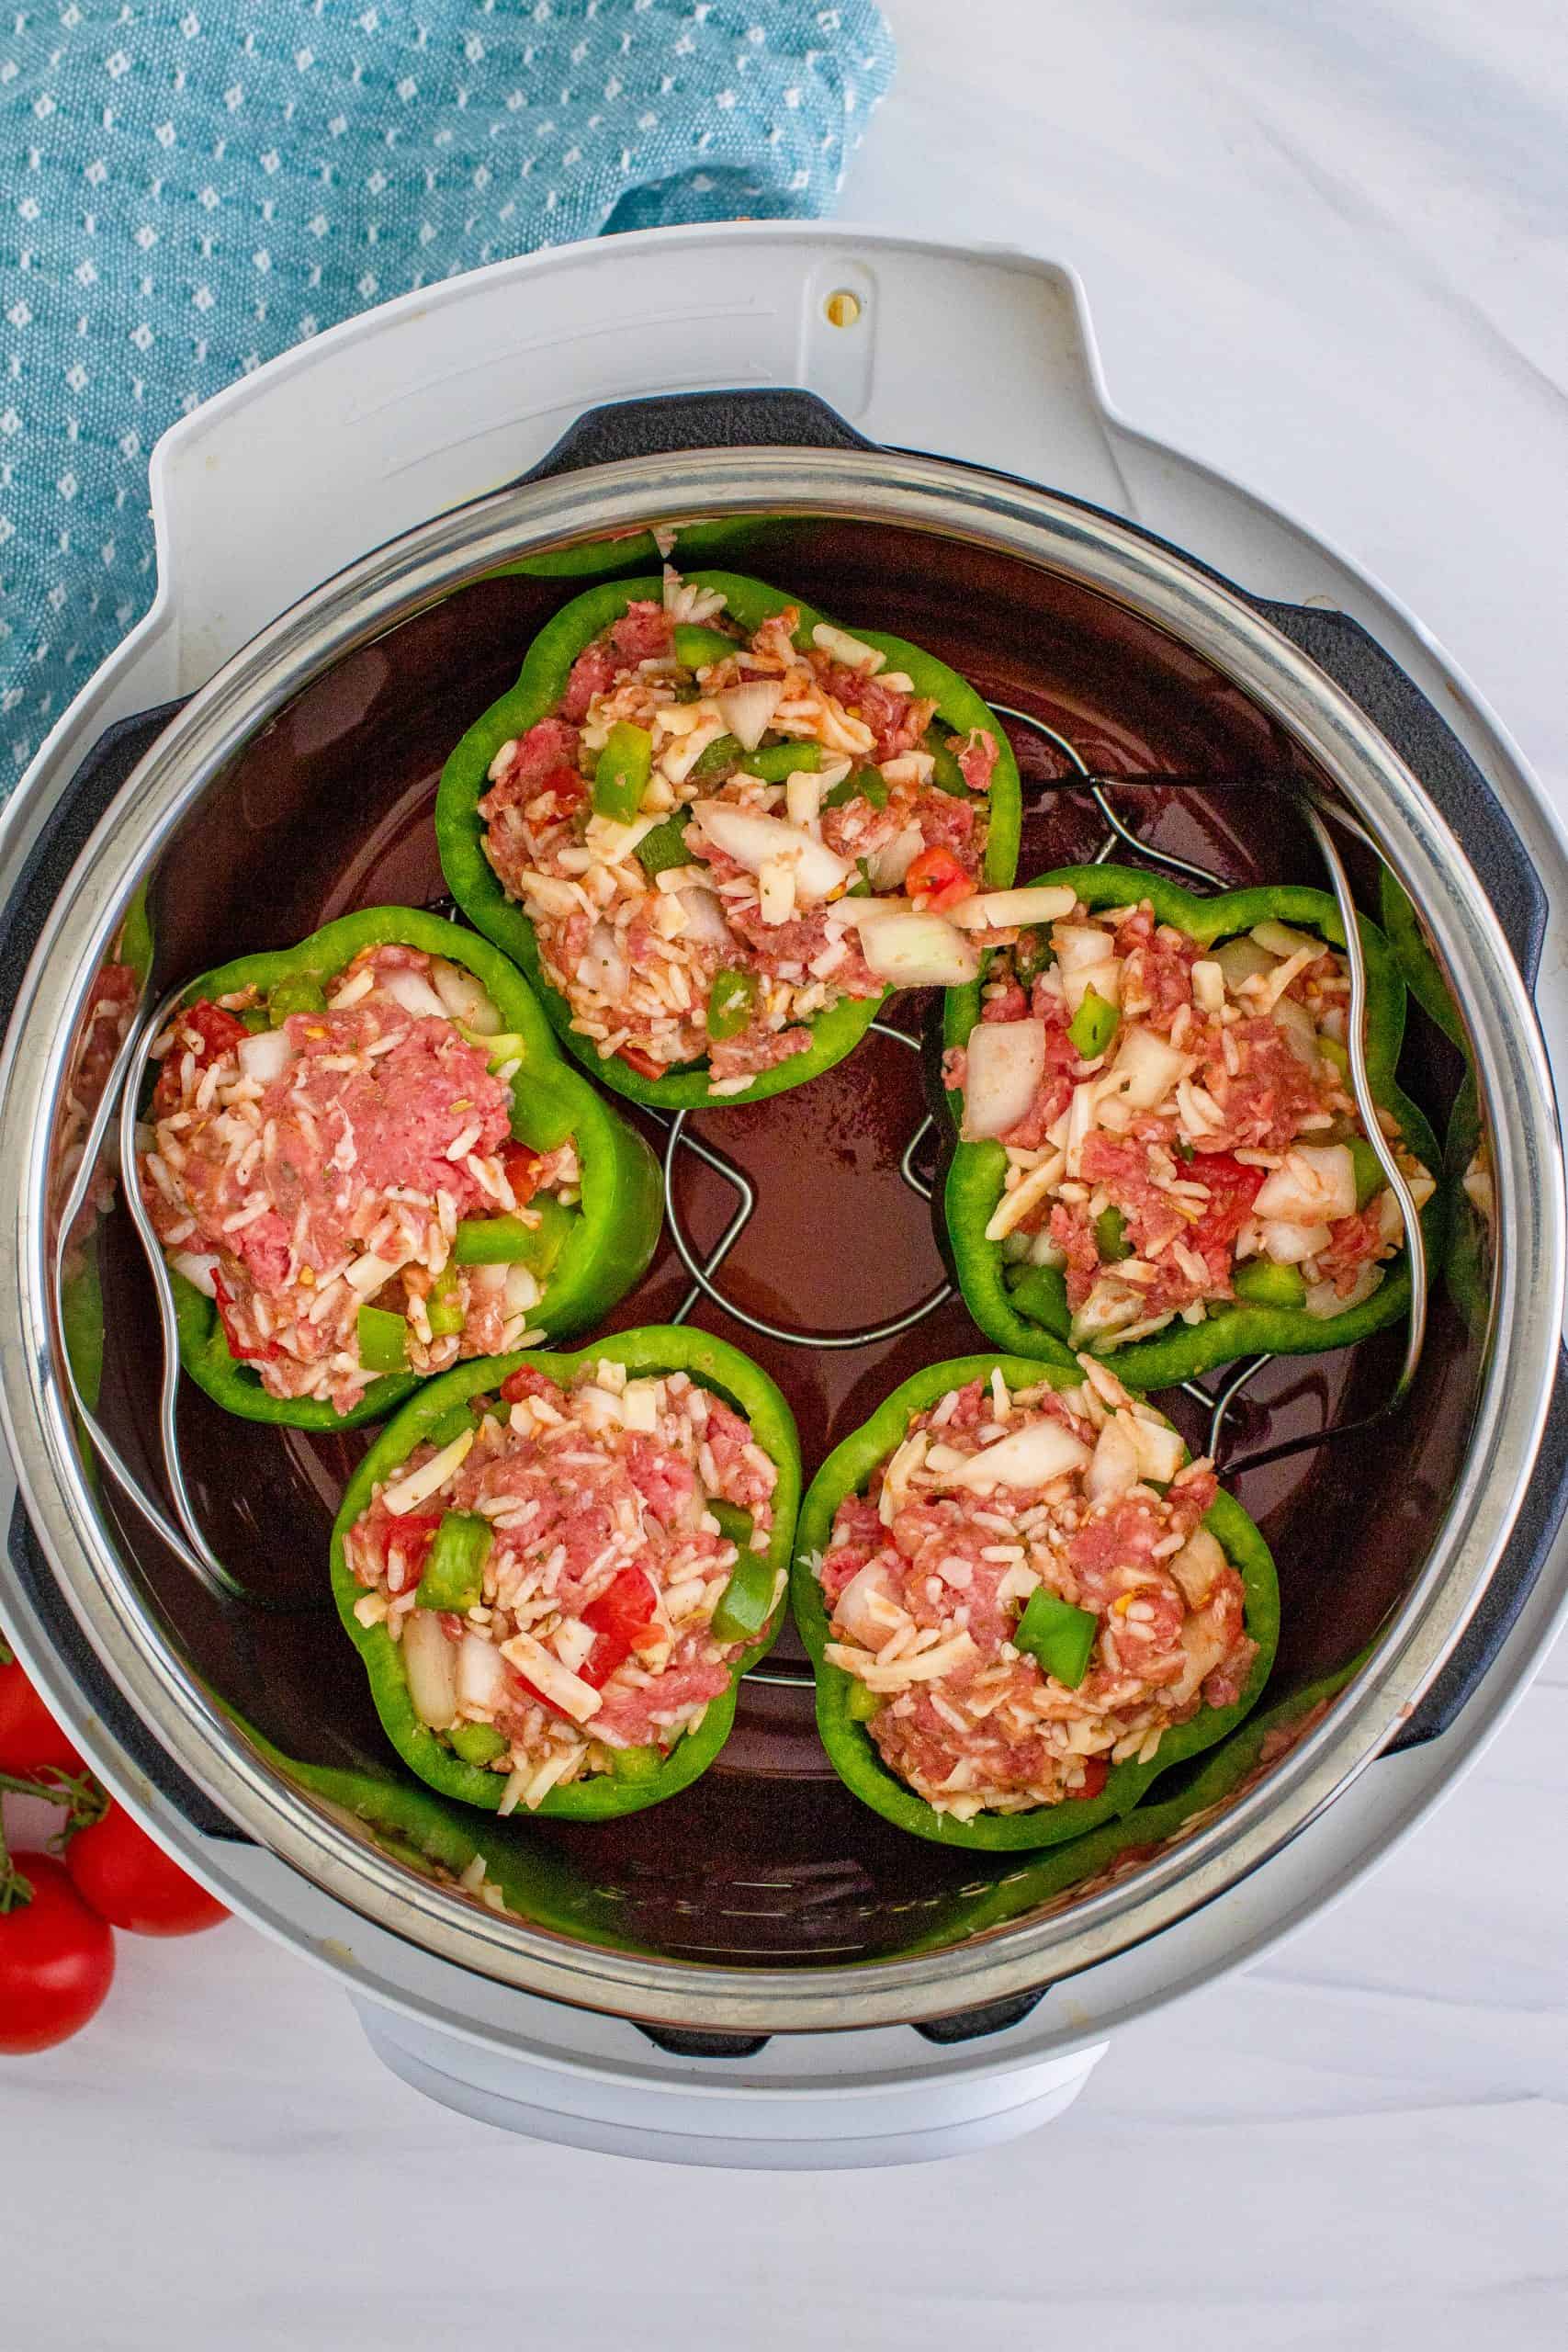 trivet holding 5 stuffed peppers placed inside the instant pot.